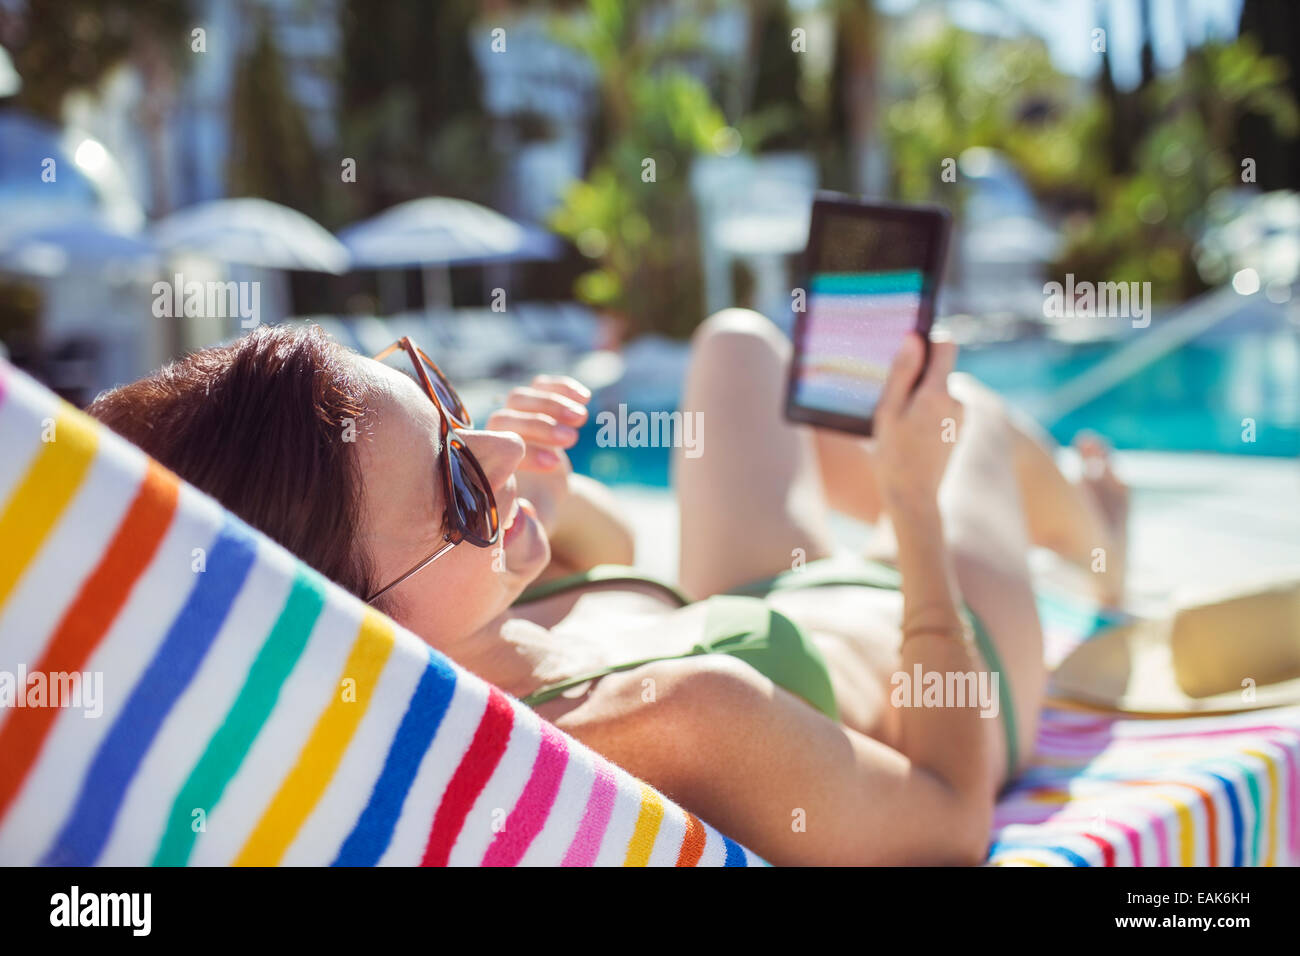 Smiling woman with digital tablet sunbathing by swimming pool Stock Photo